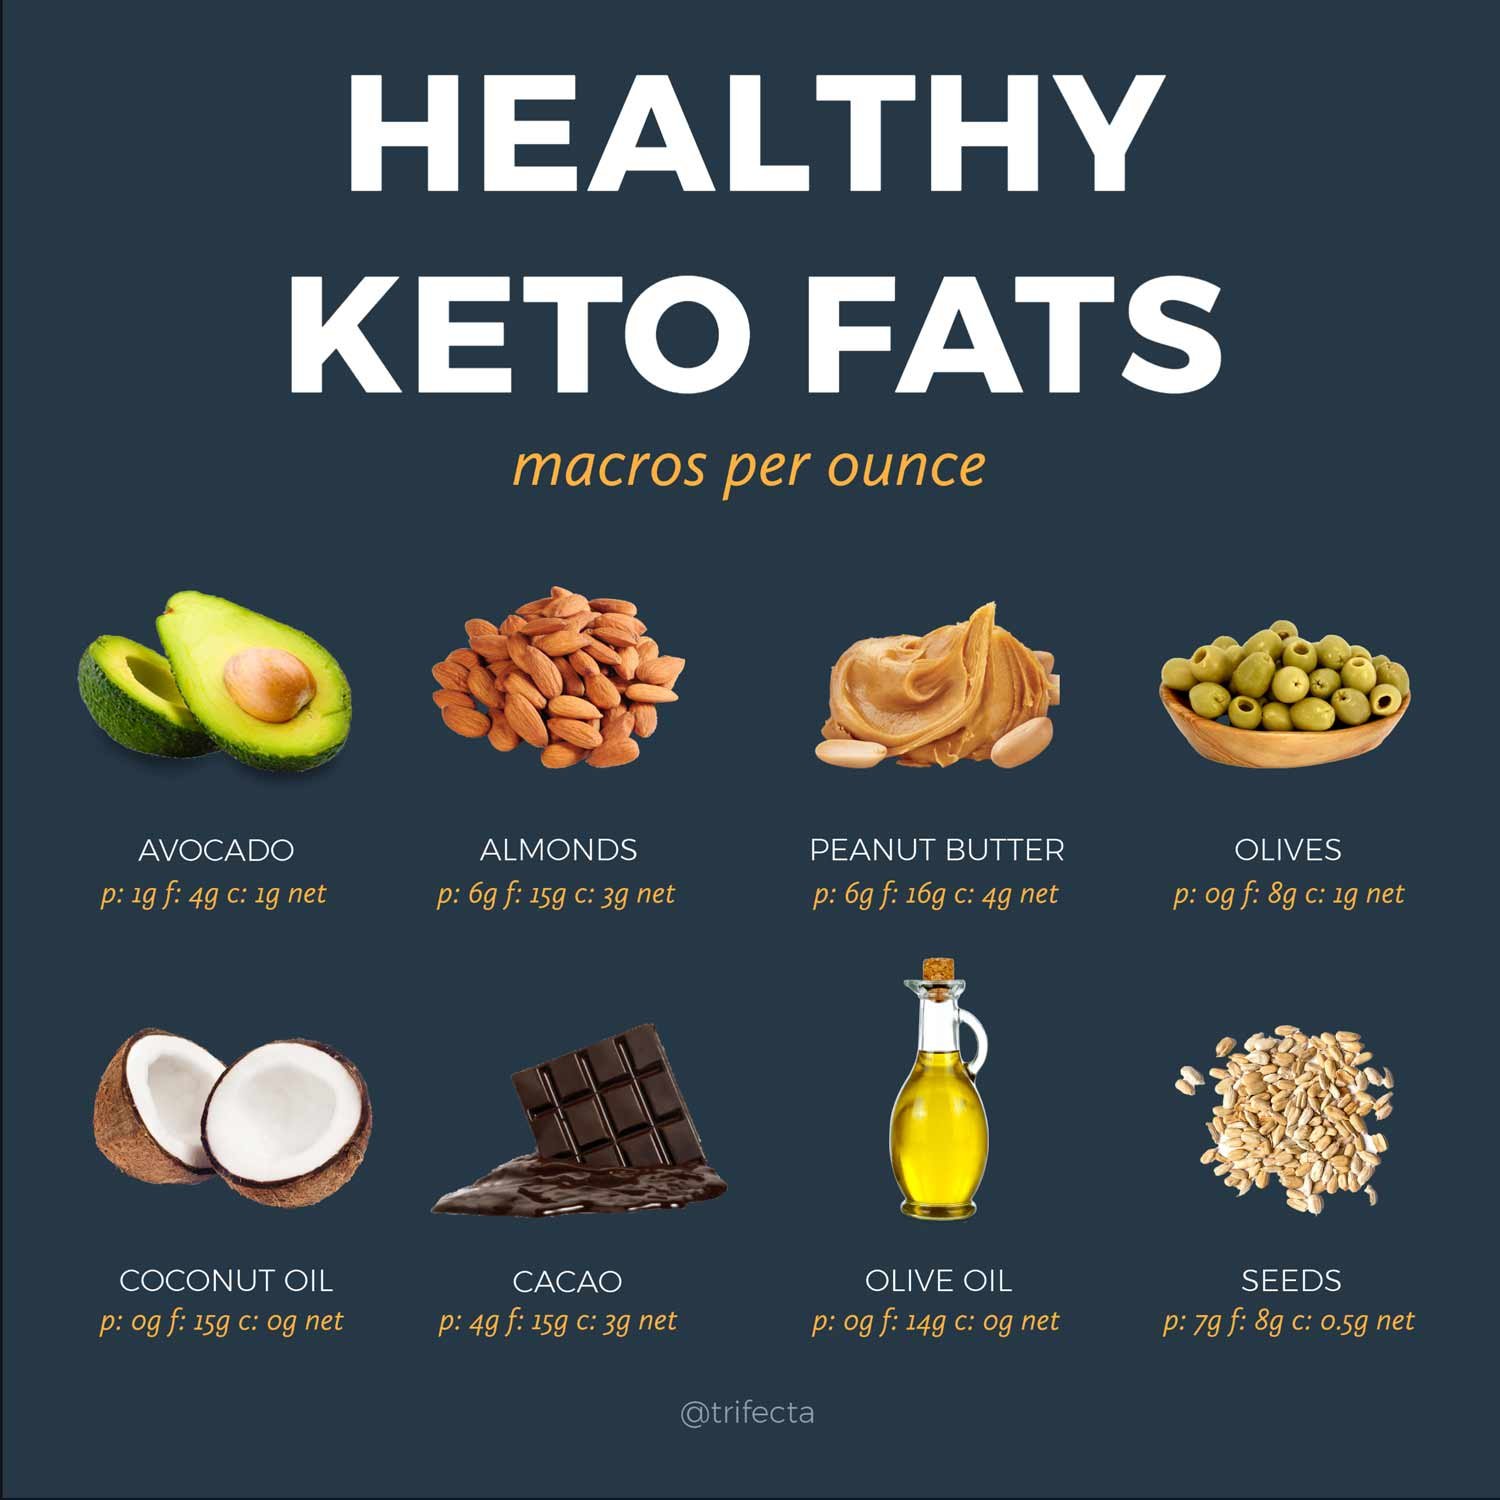 Low Carb Fruits Allowed on the Ketogenic Diet - The Complete Guide